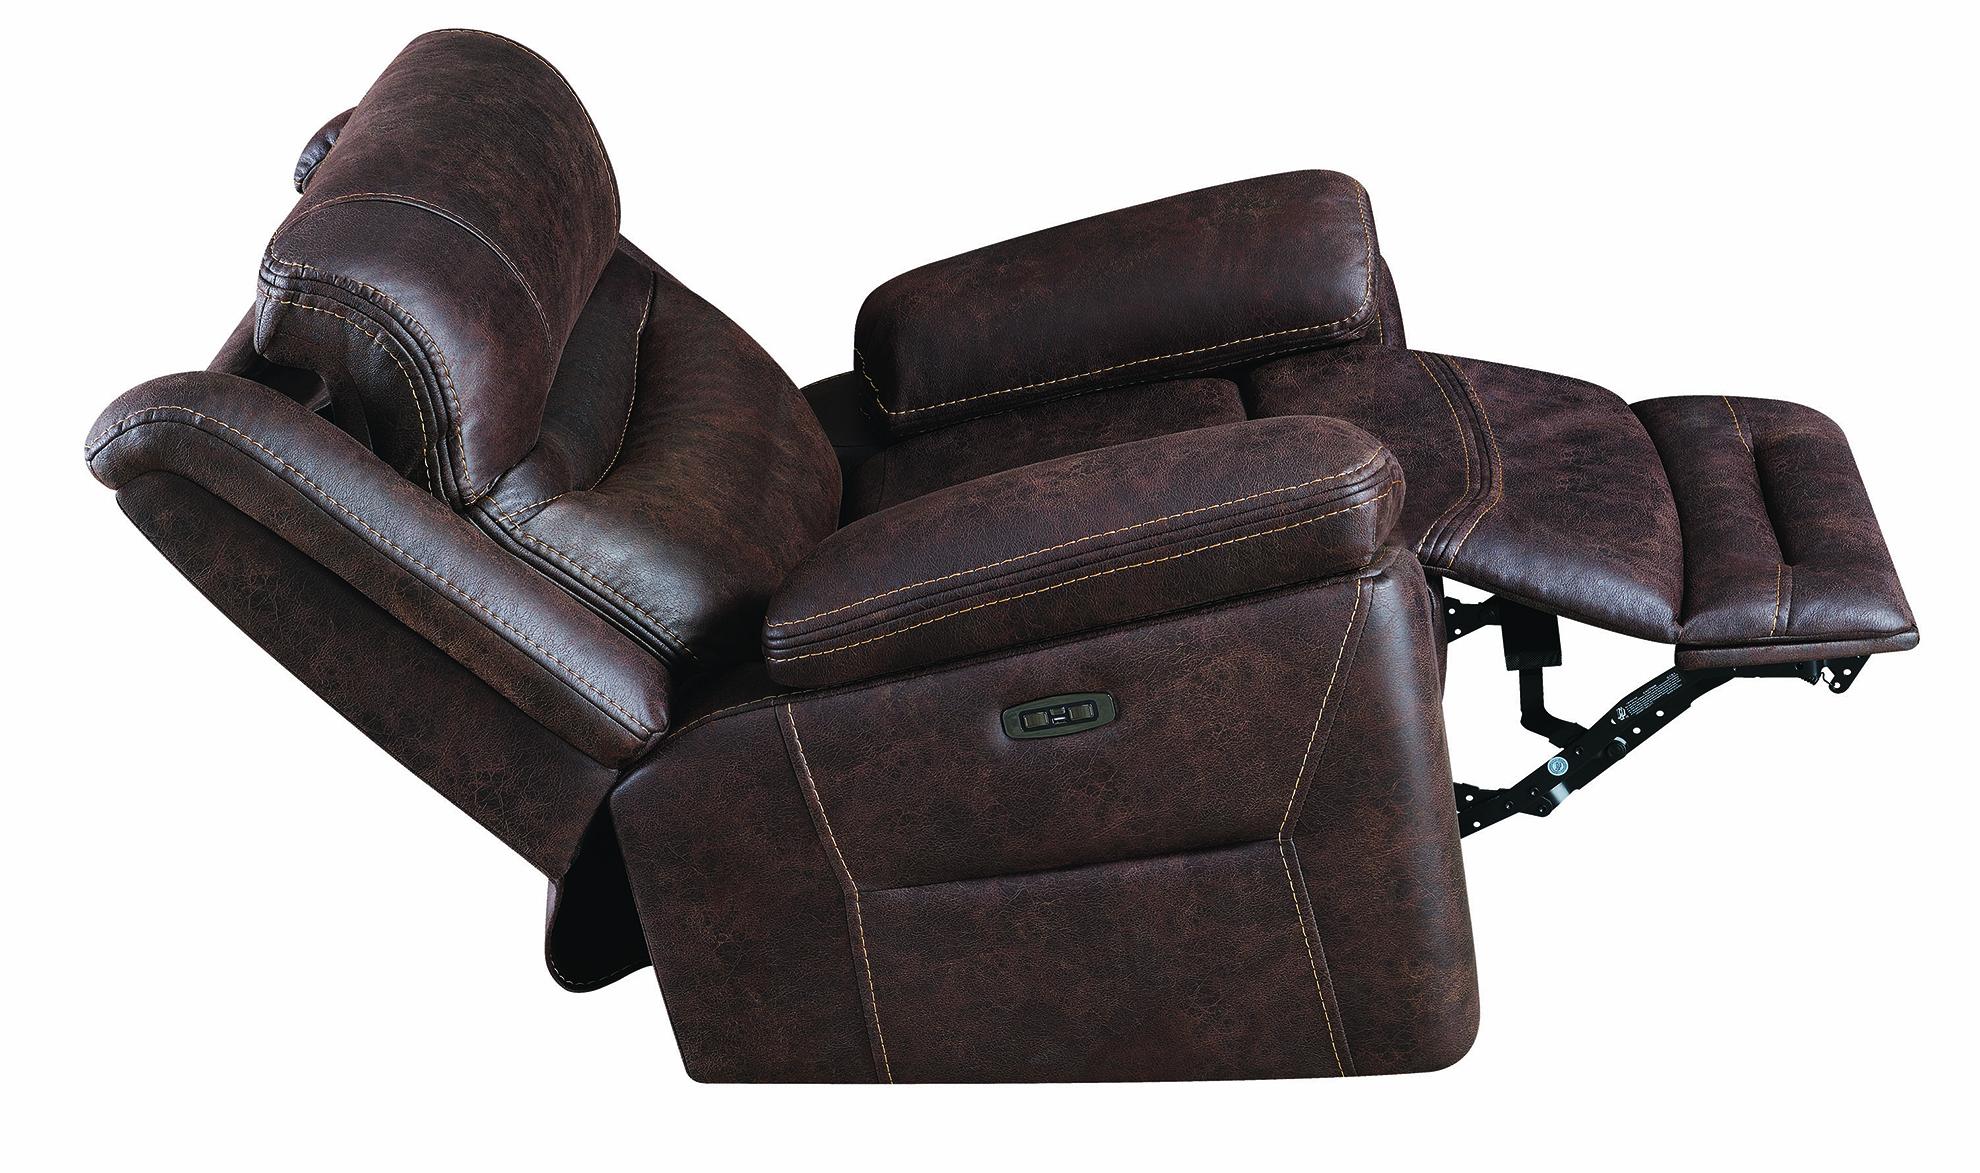 

                    
Coaster 603331PP-S3 Hemer Power Living Room Set Chocolate Faux Suede Purchase 
